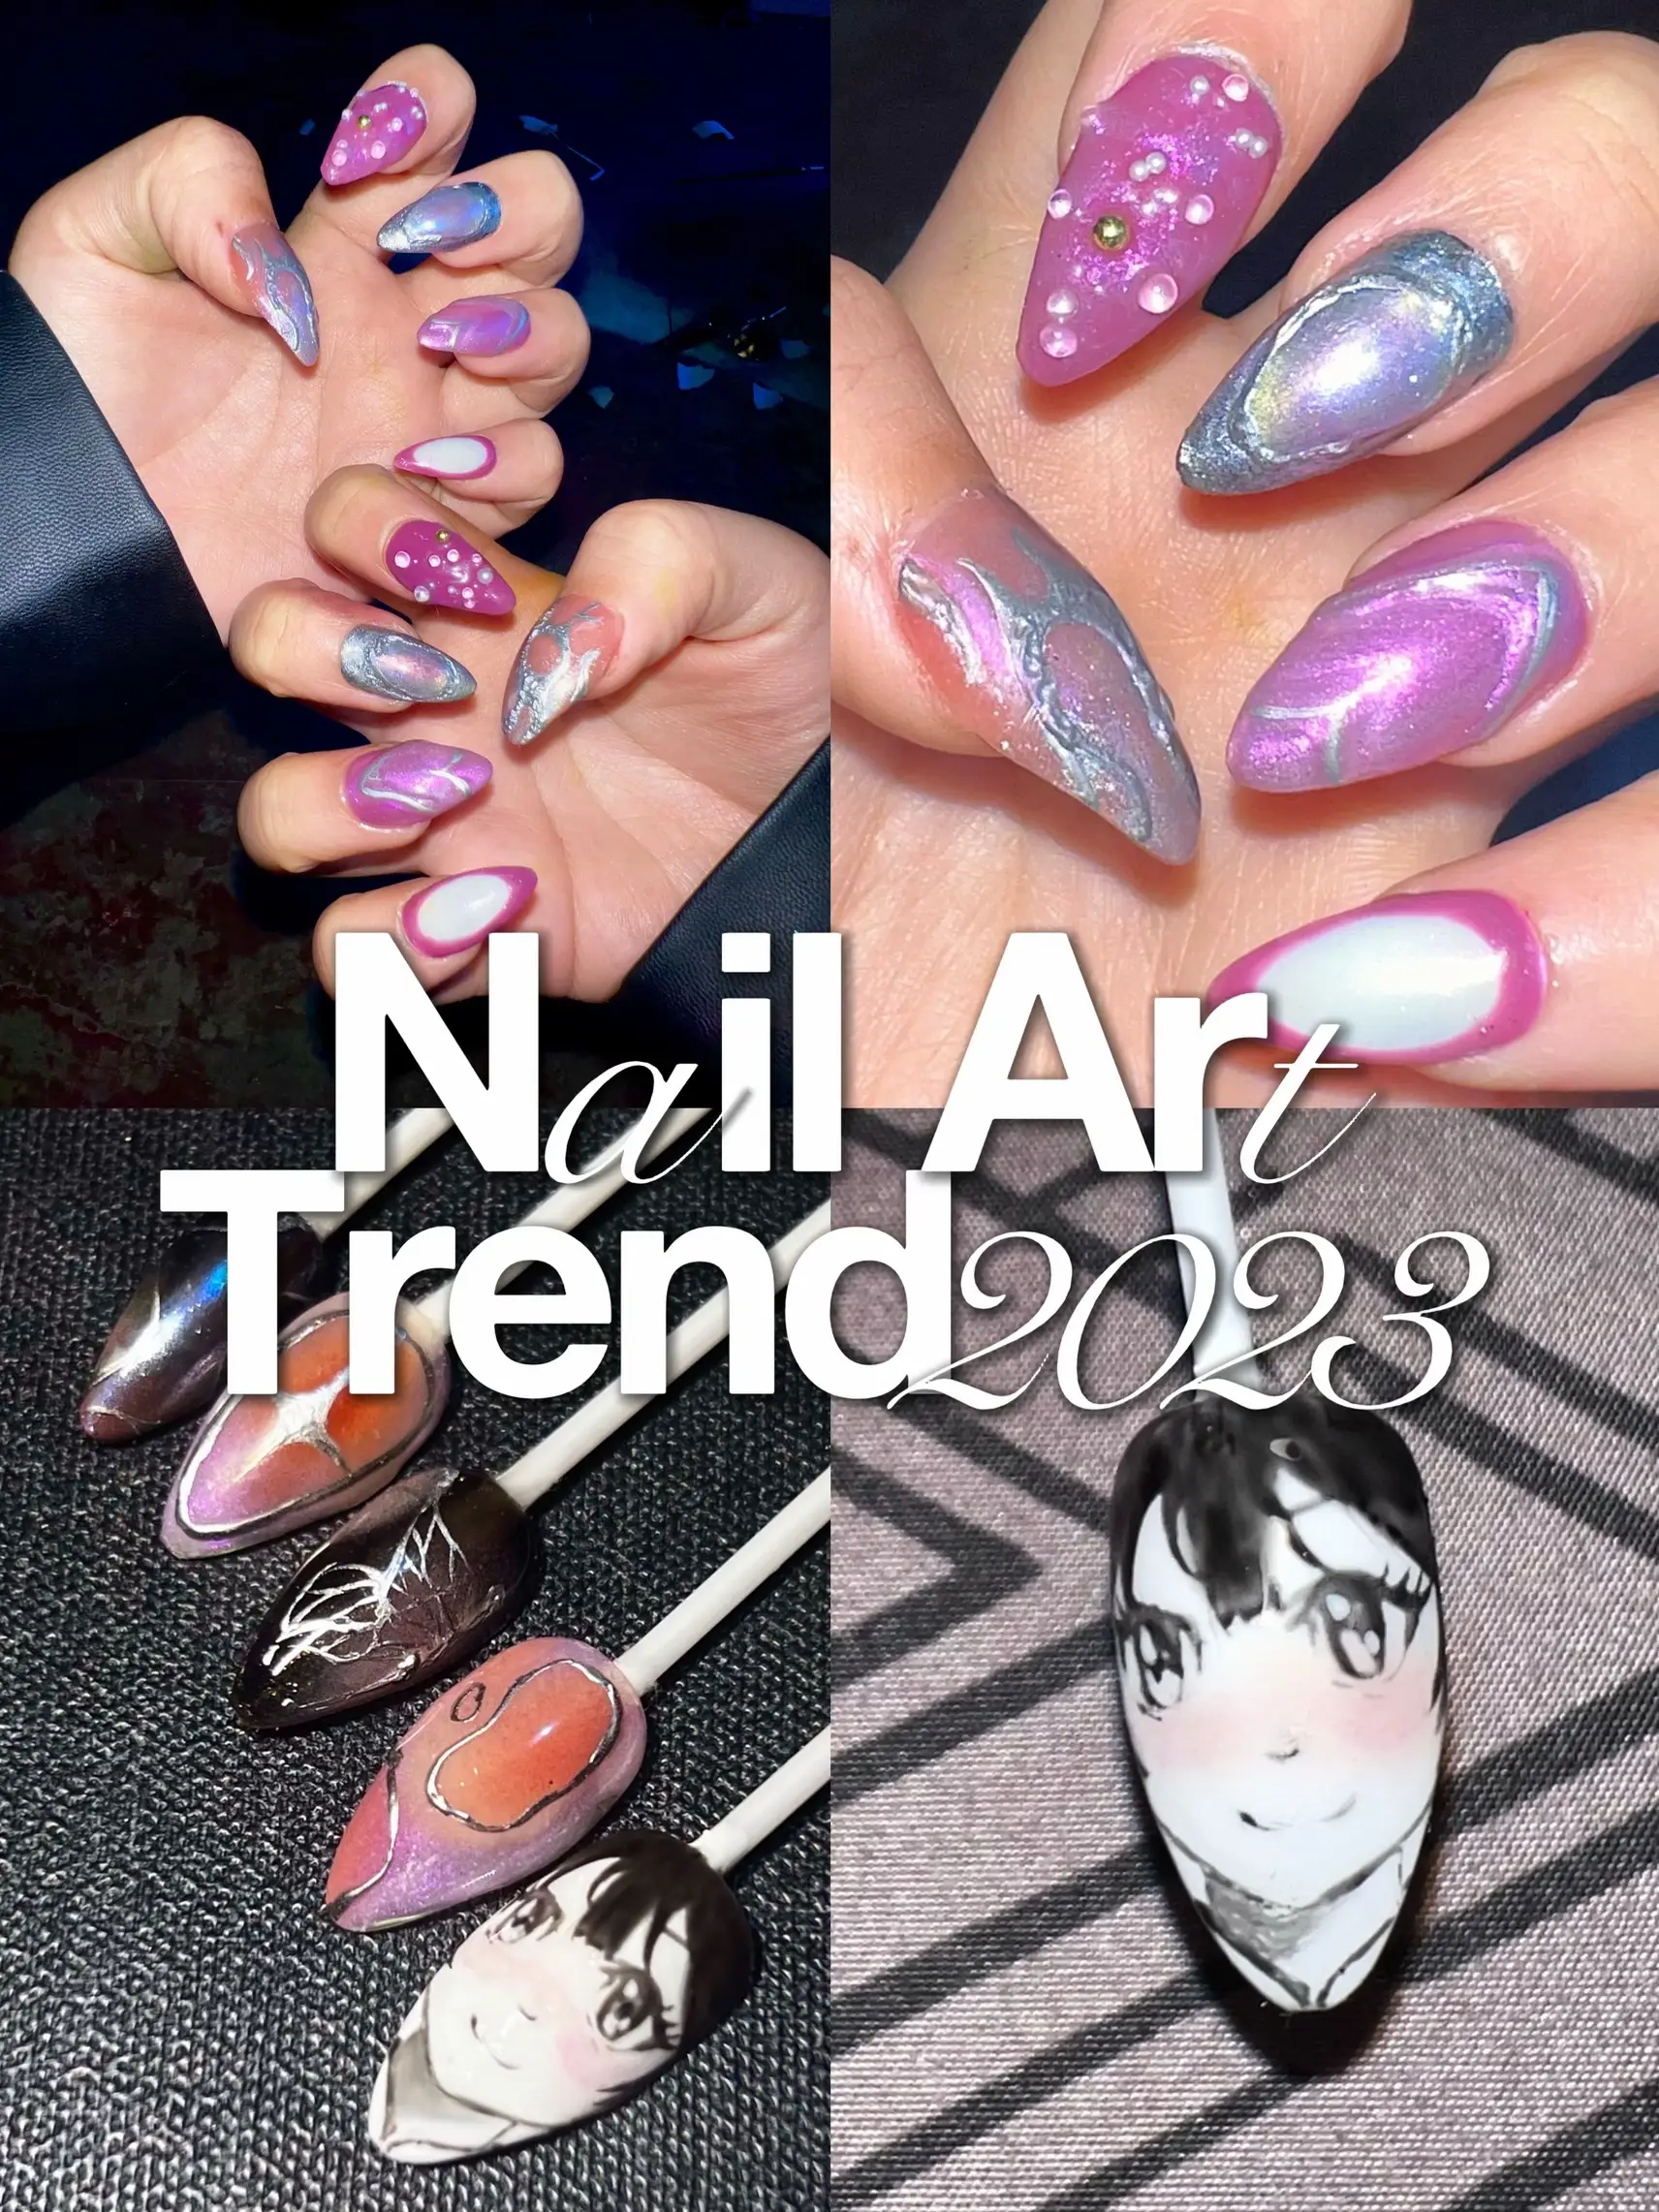 How To Do the Airbrush Nail Art Trend At Home